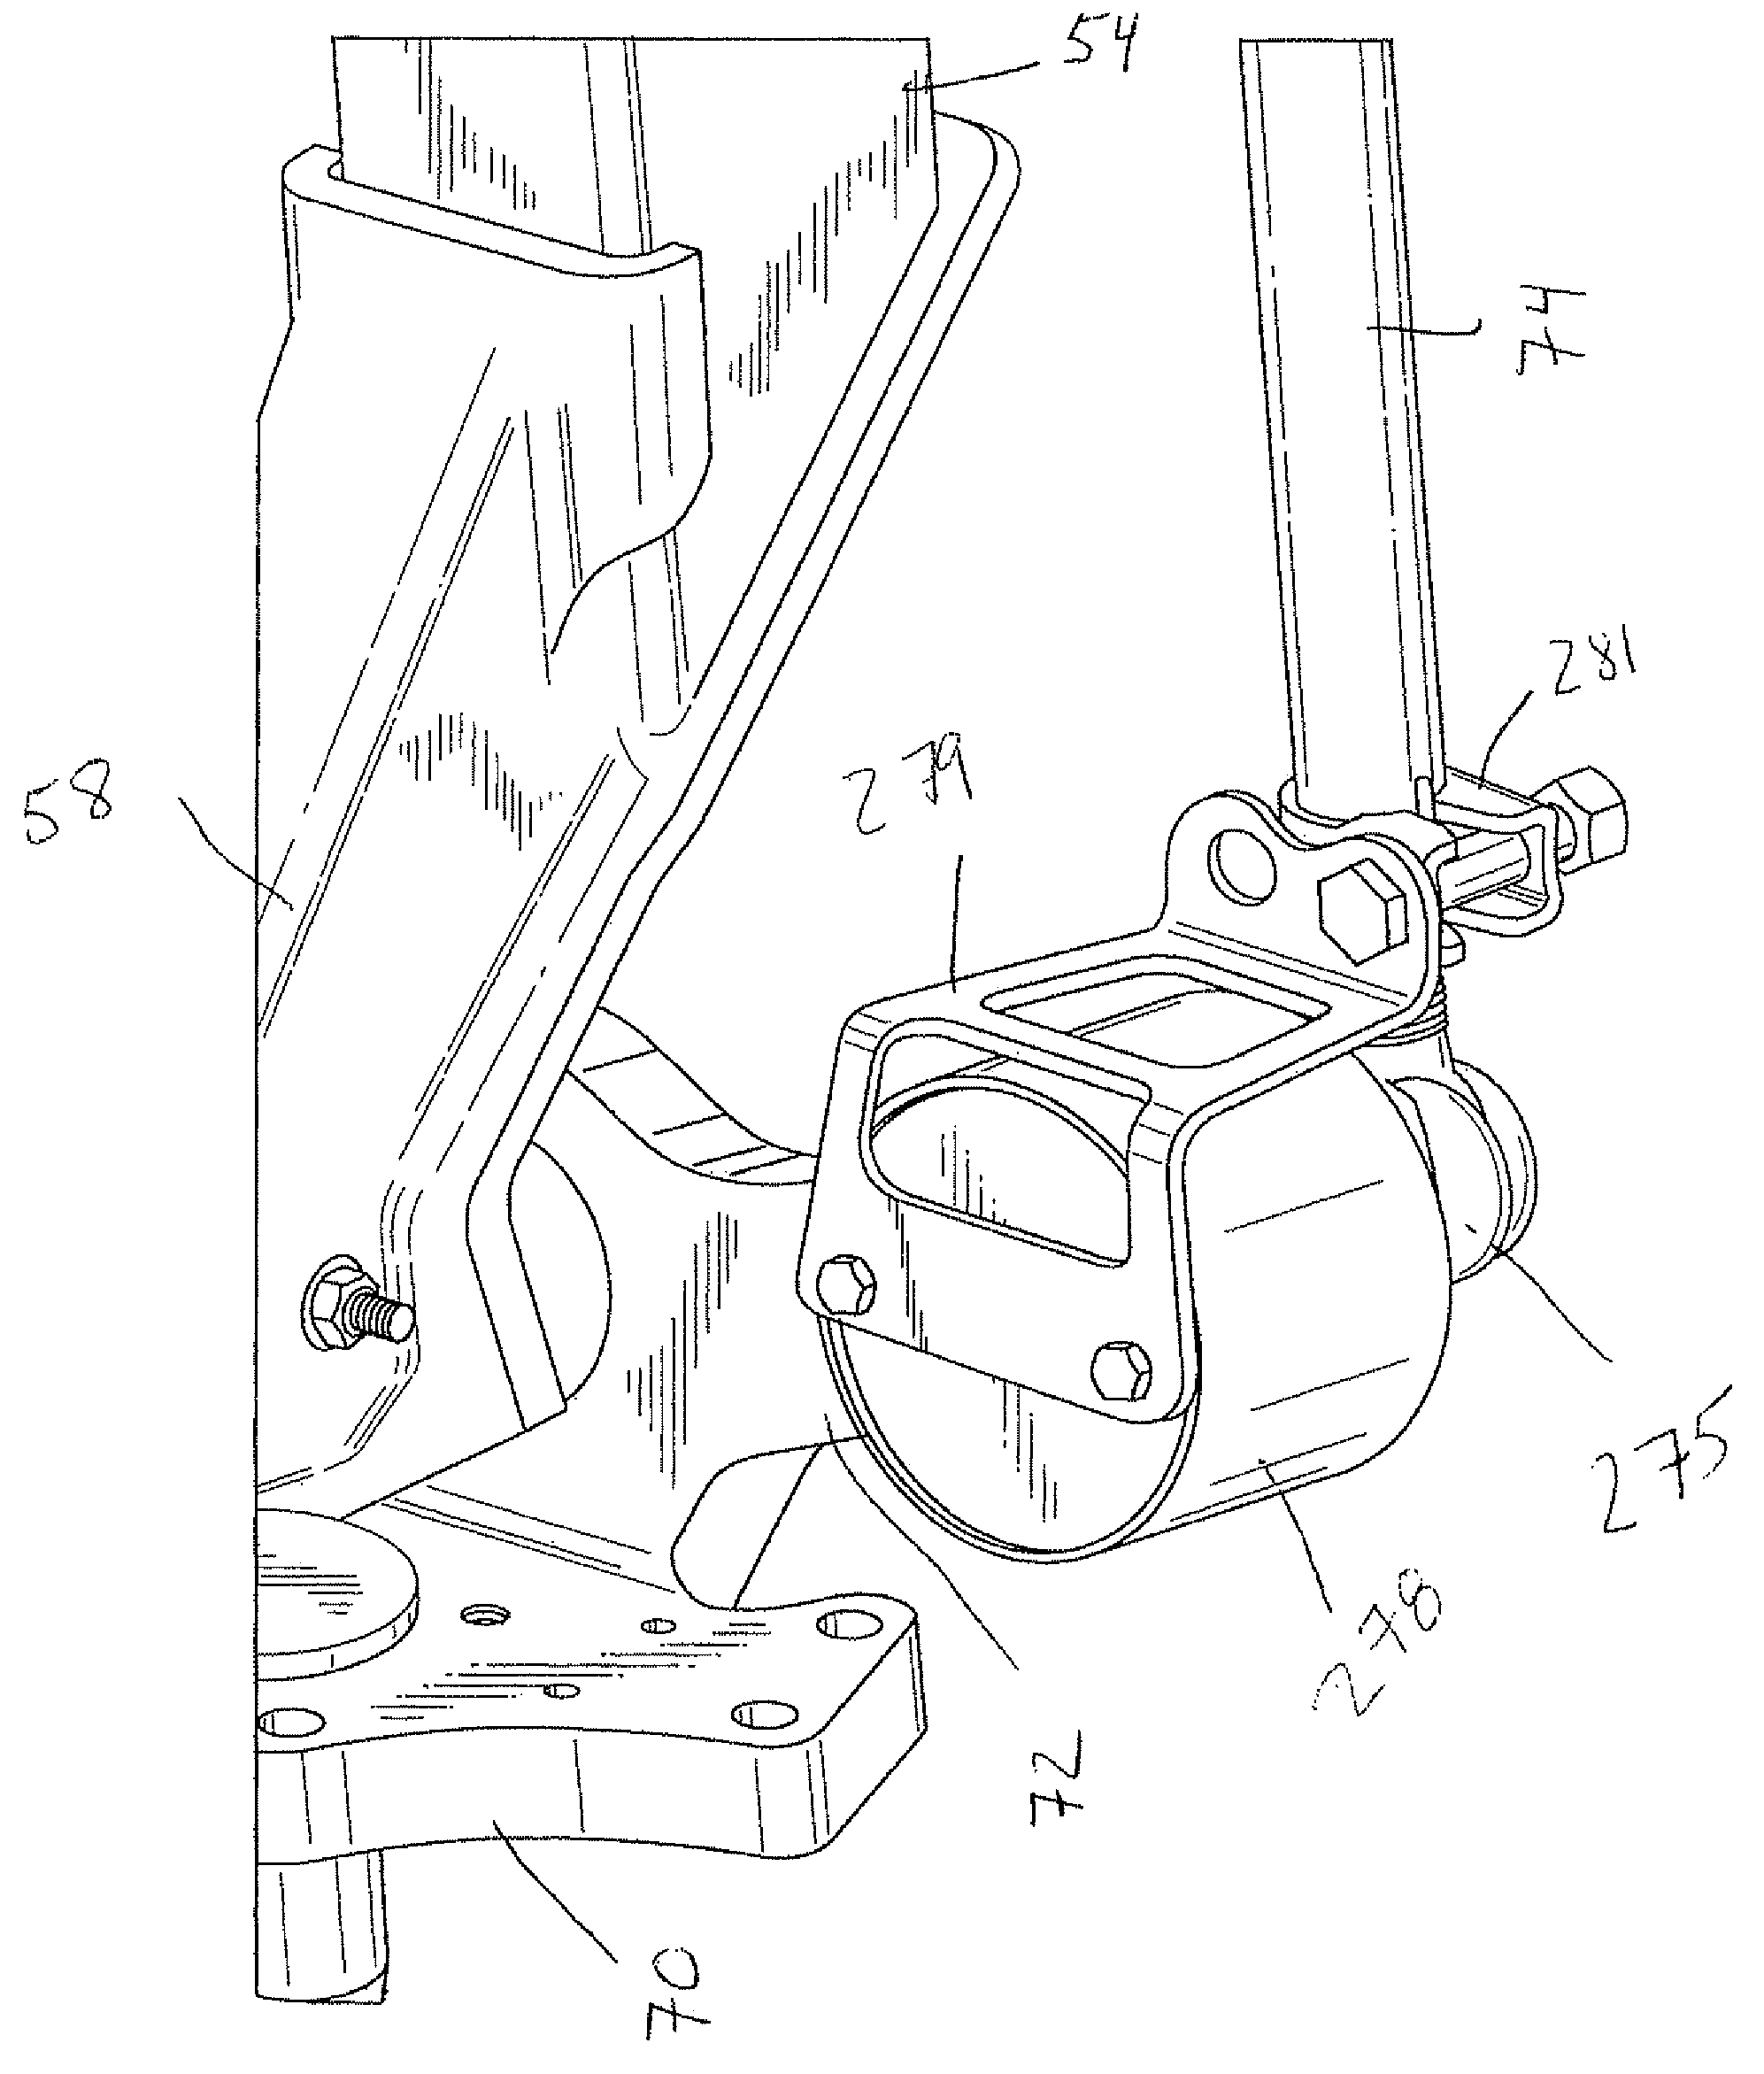 Self-steering axle suspension system having a rotary stabilizer mounted at a pivot joint associated with a tie rod